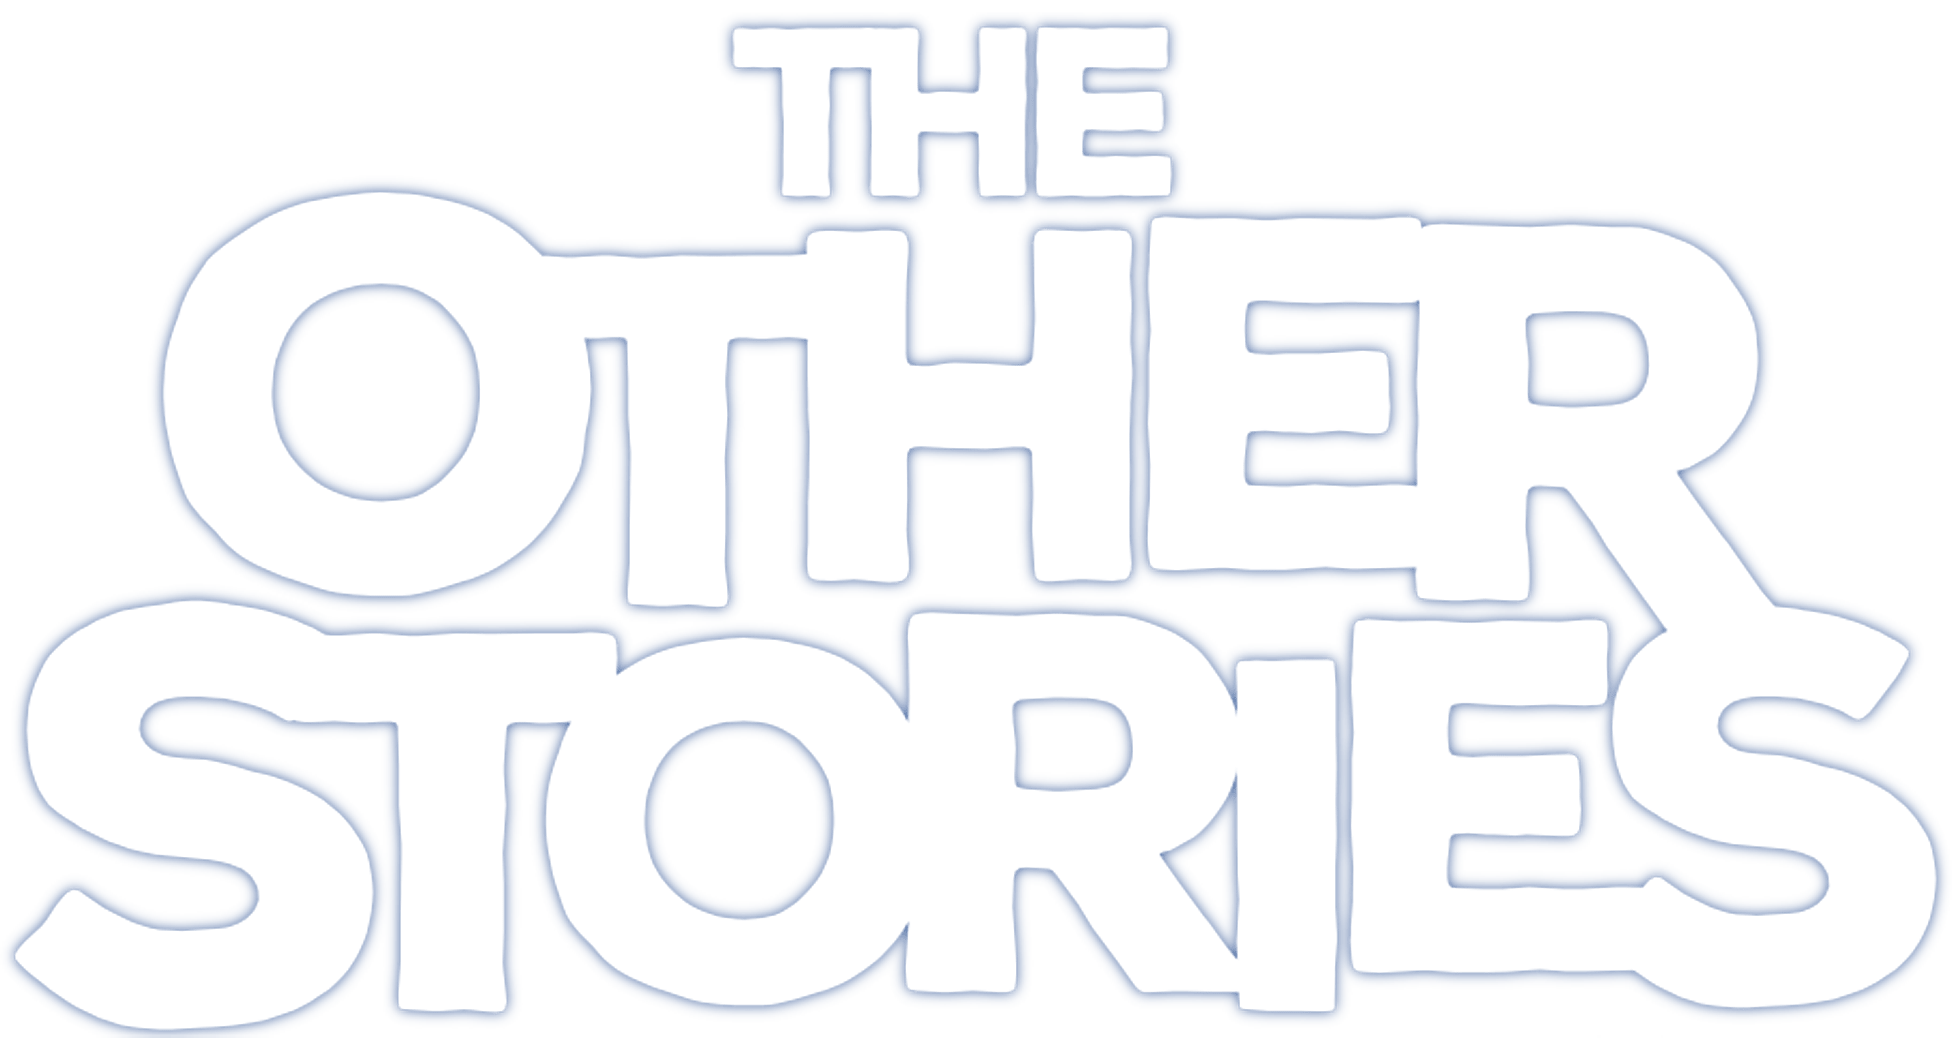 The Other Stories